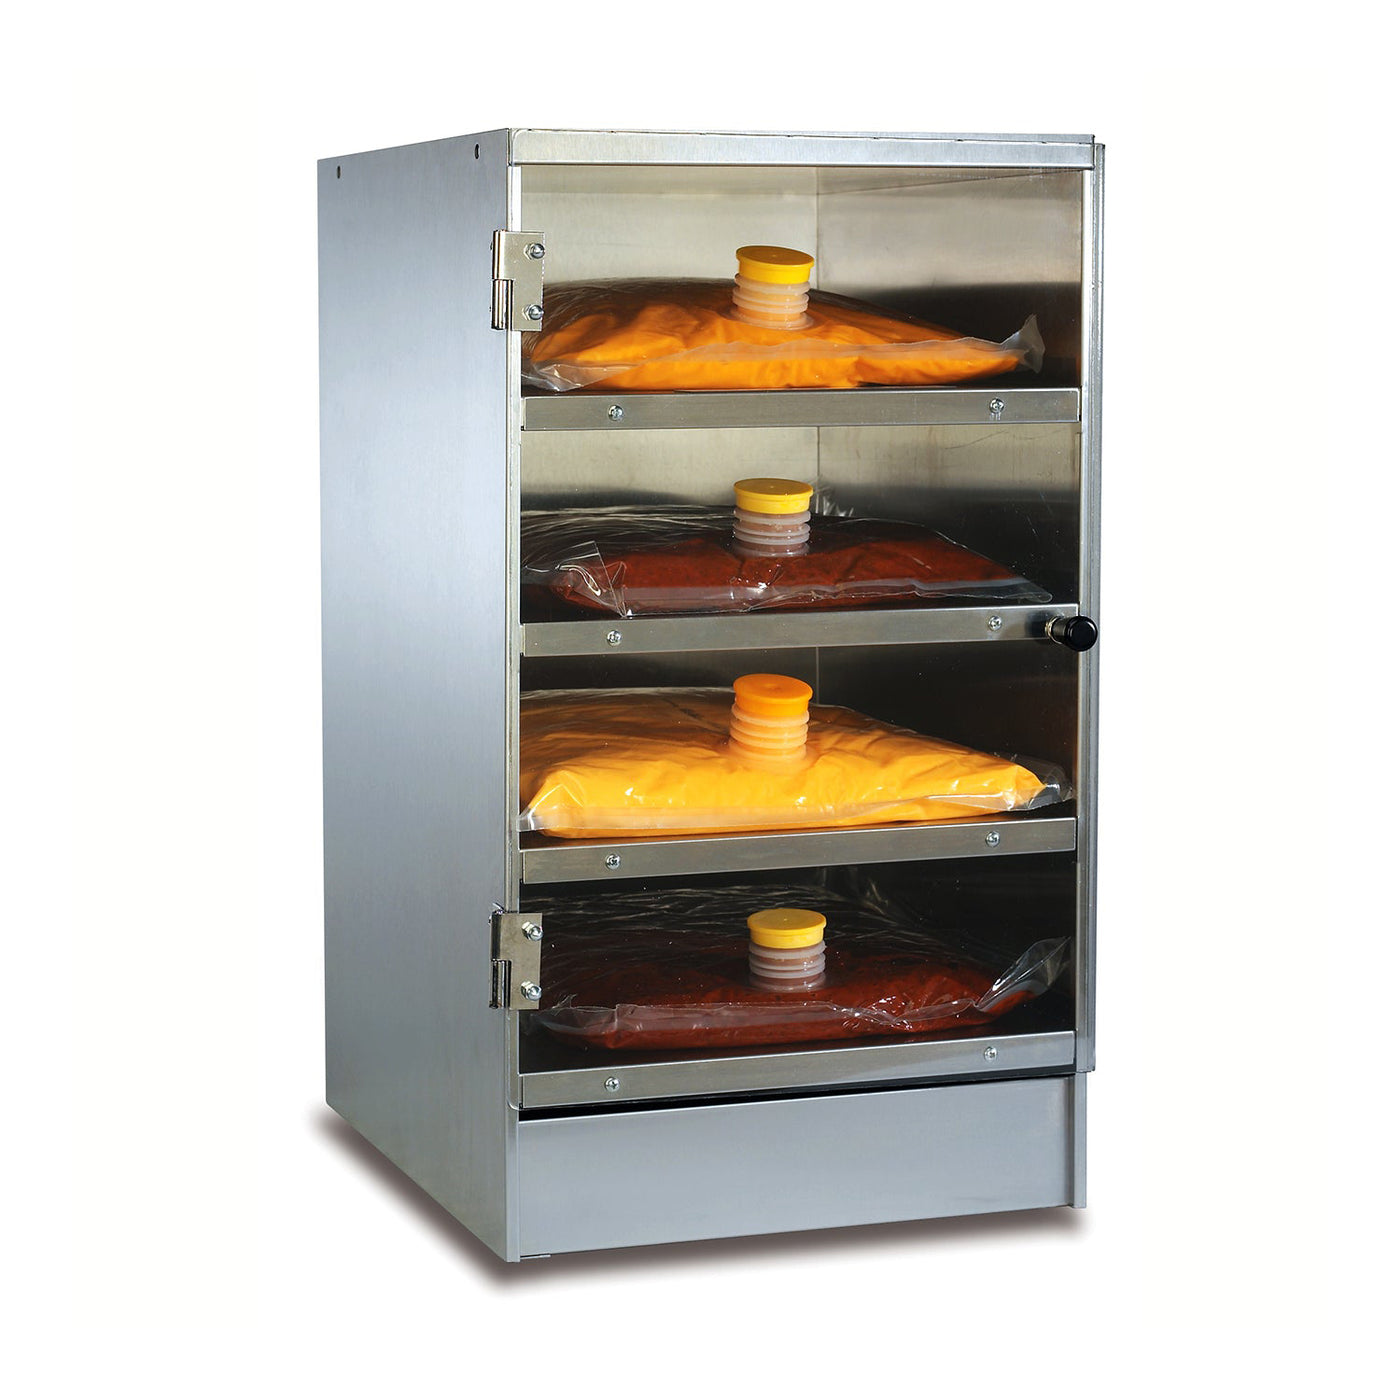 Gold Medal 5330 11-1/2 32 Cup Cheese Warmer